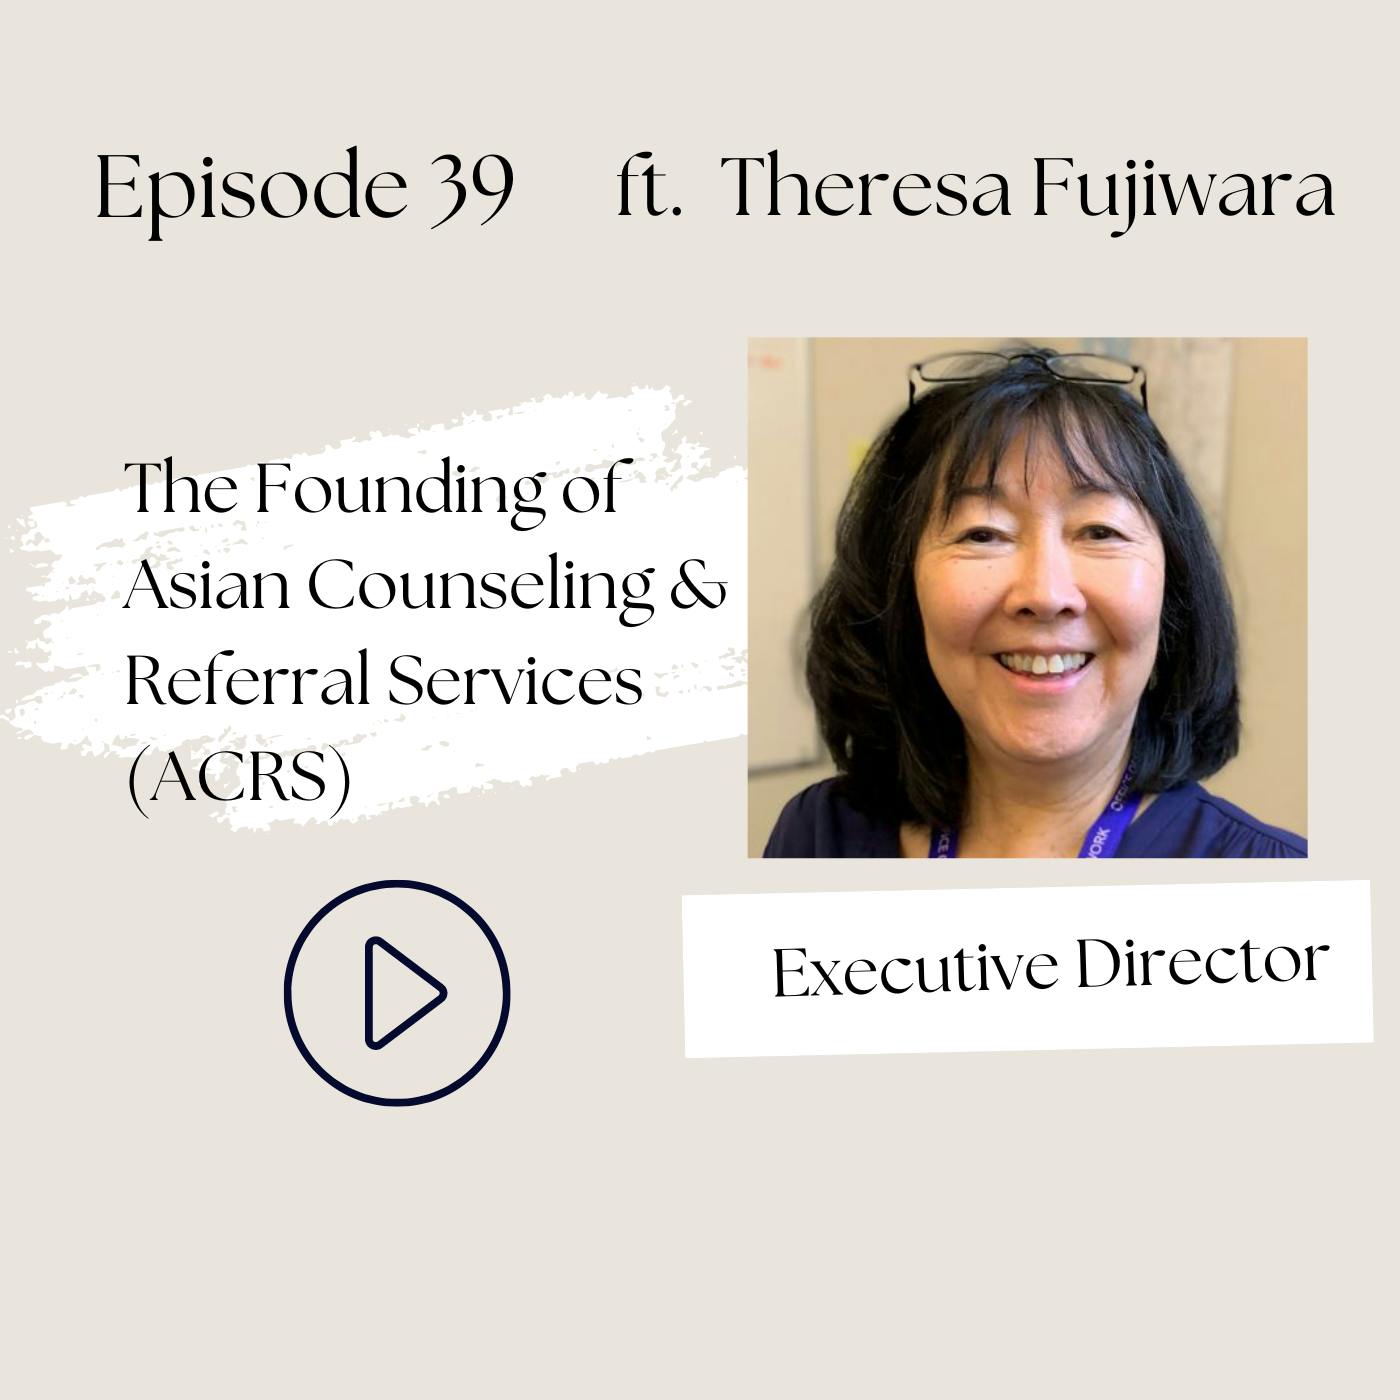 The Founding of Asian Counseling & Referral Services (ACRS): A Conversation with Theresa Fujiwara (Ep. 39)